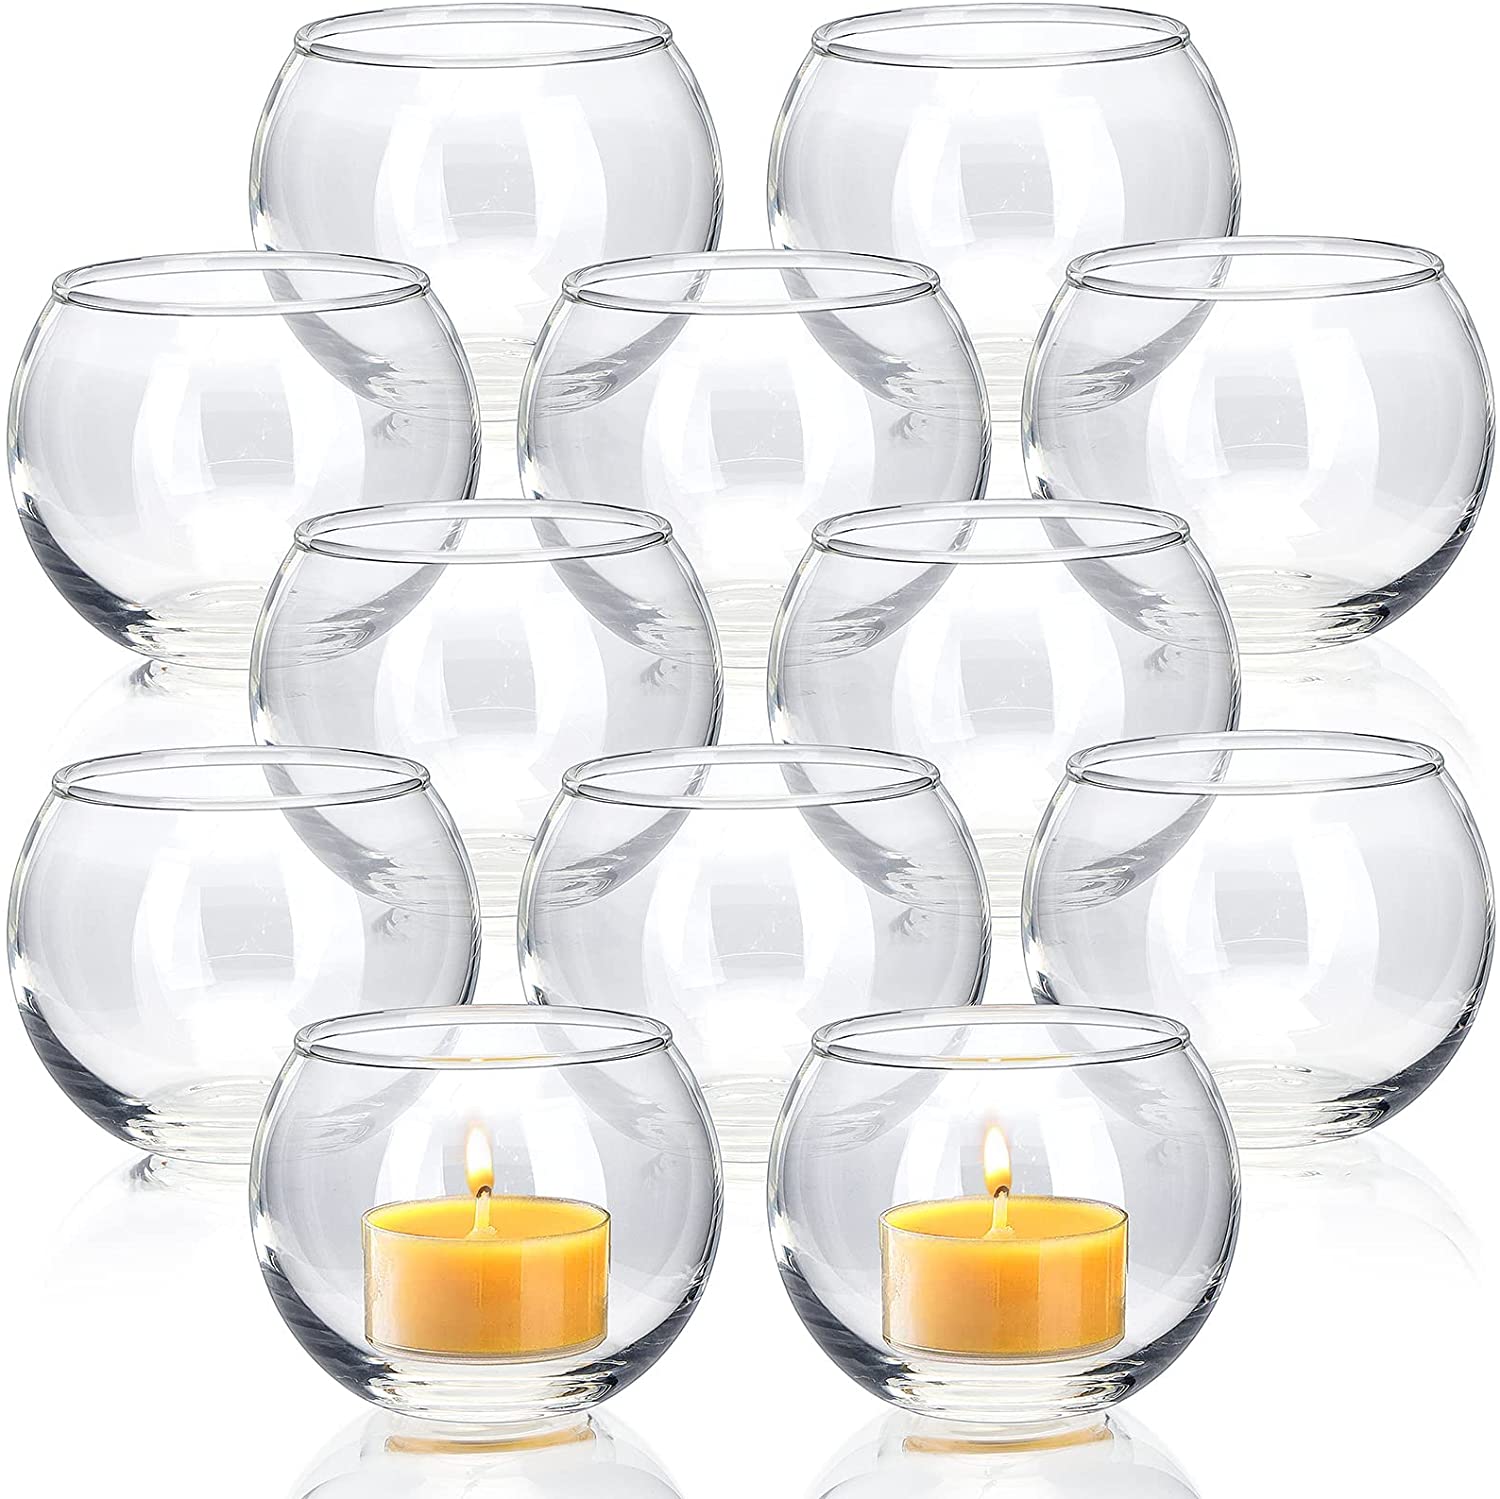 Clear Votive Candle Holders Glass Tealight Candle Holder Bulk for Wedding Decor and Home Decor